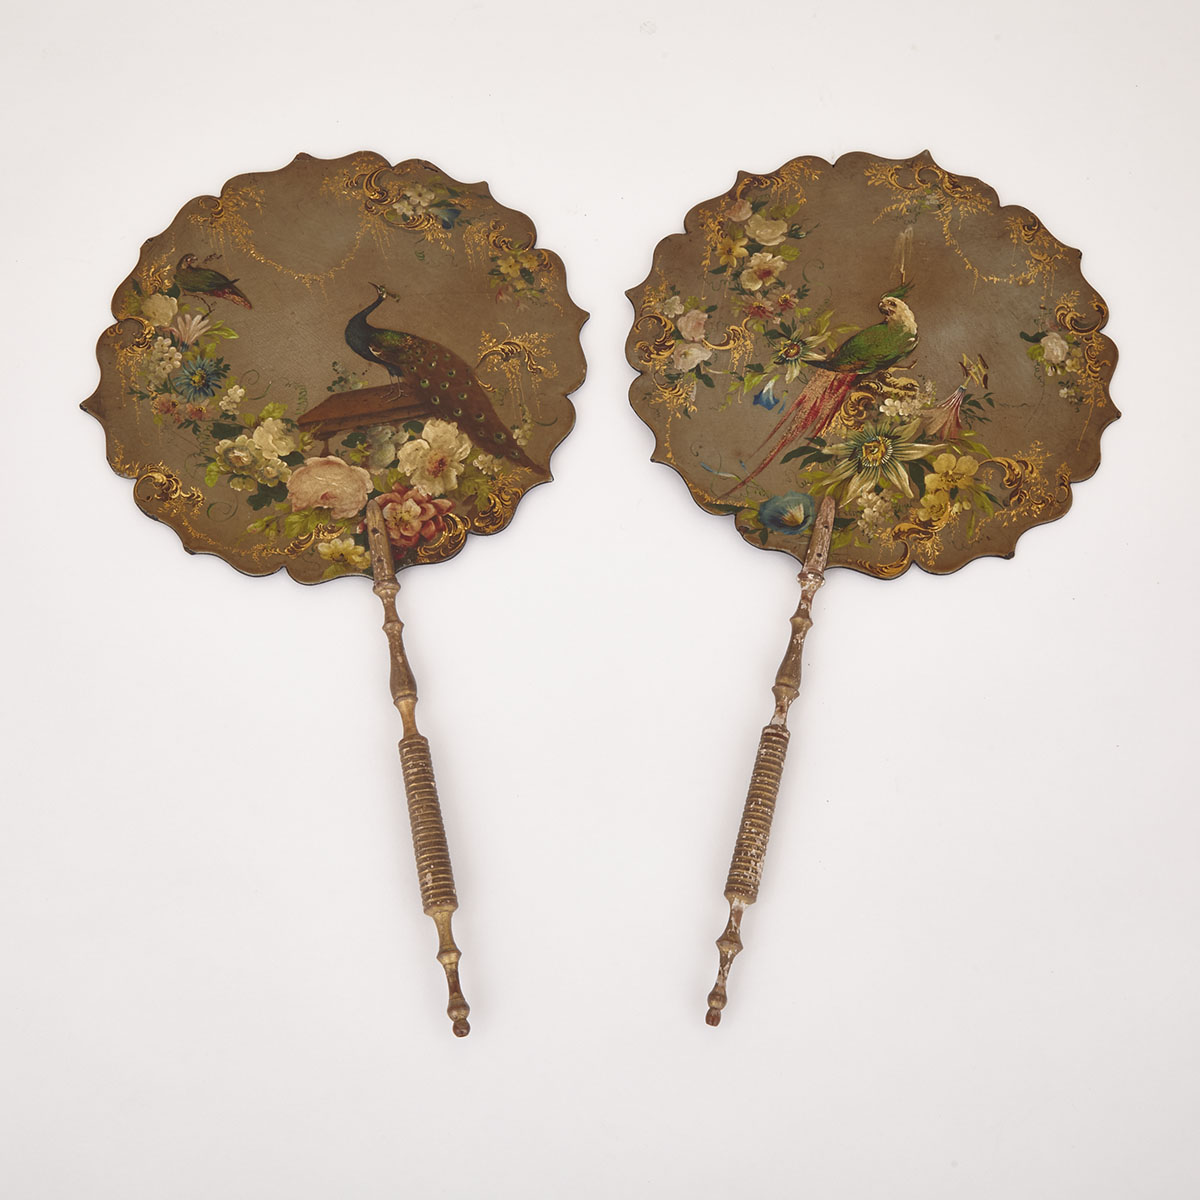 Pair of Regency Lacquered Papier Maché Face Screens, early 19th century